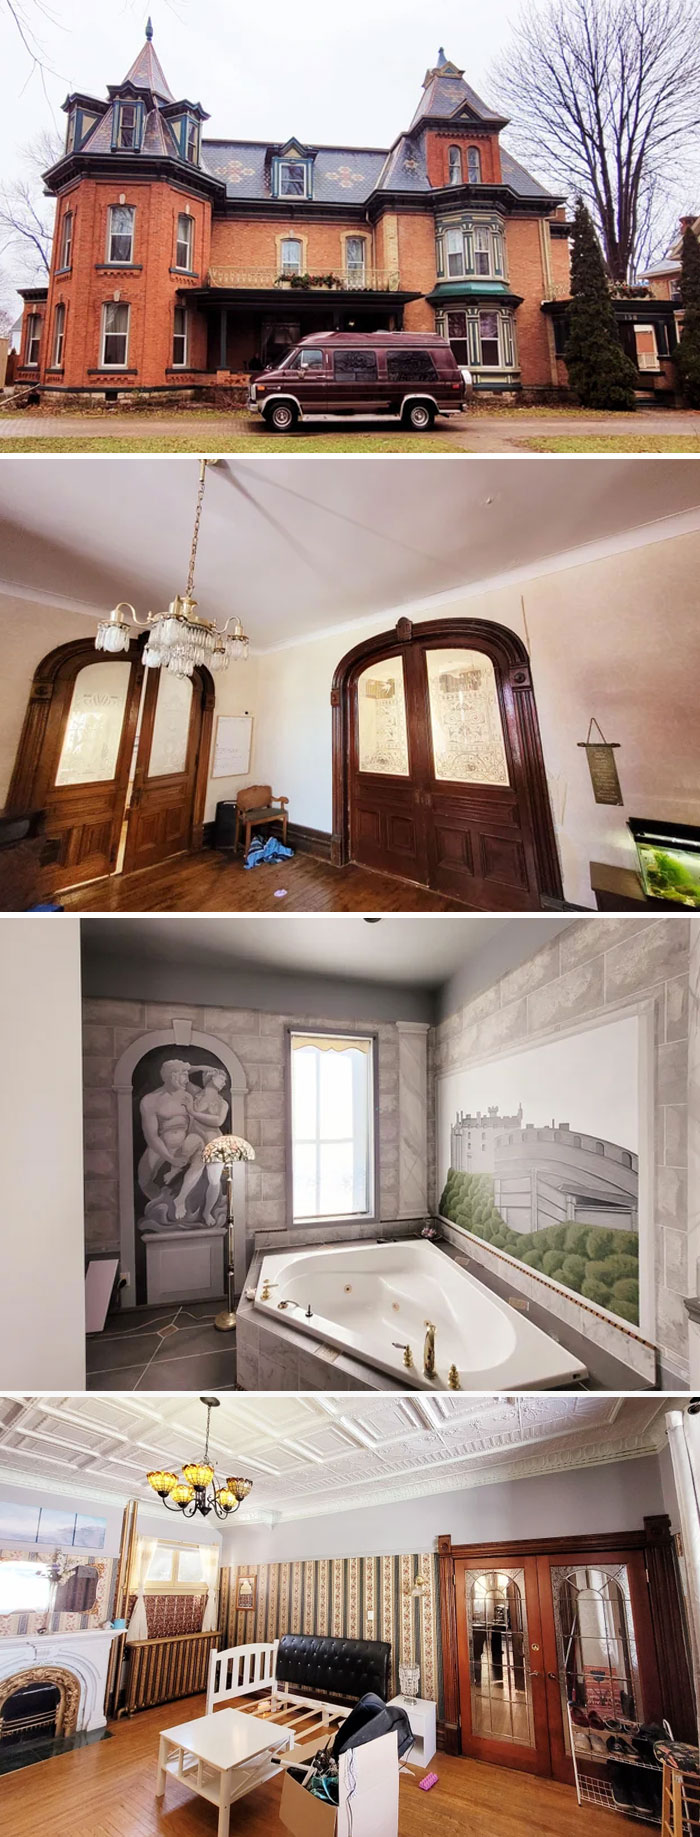 Interior Shots Of Our New (To Us) 1878ish Queen Anne Home With Three Family Units From The Same Family Pooling Resources